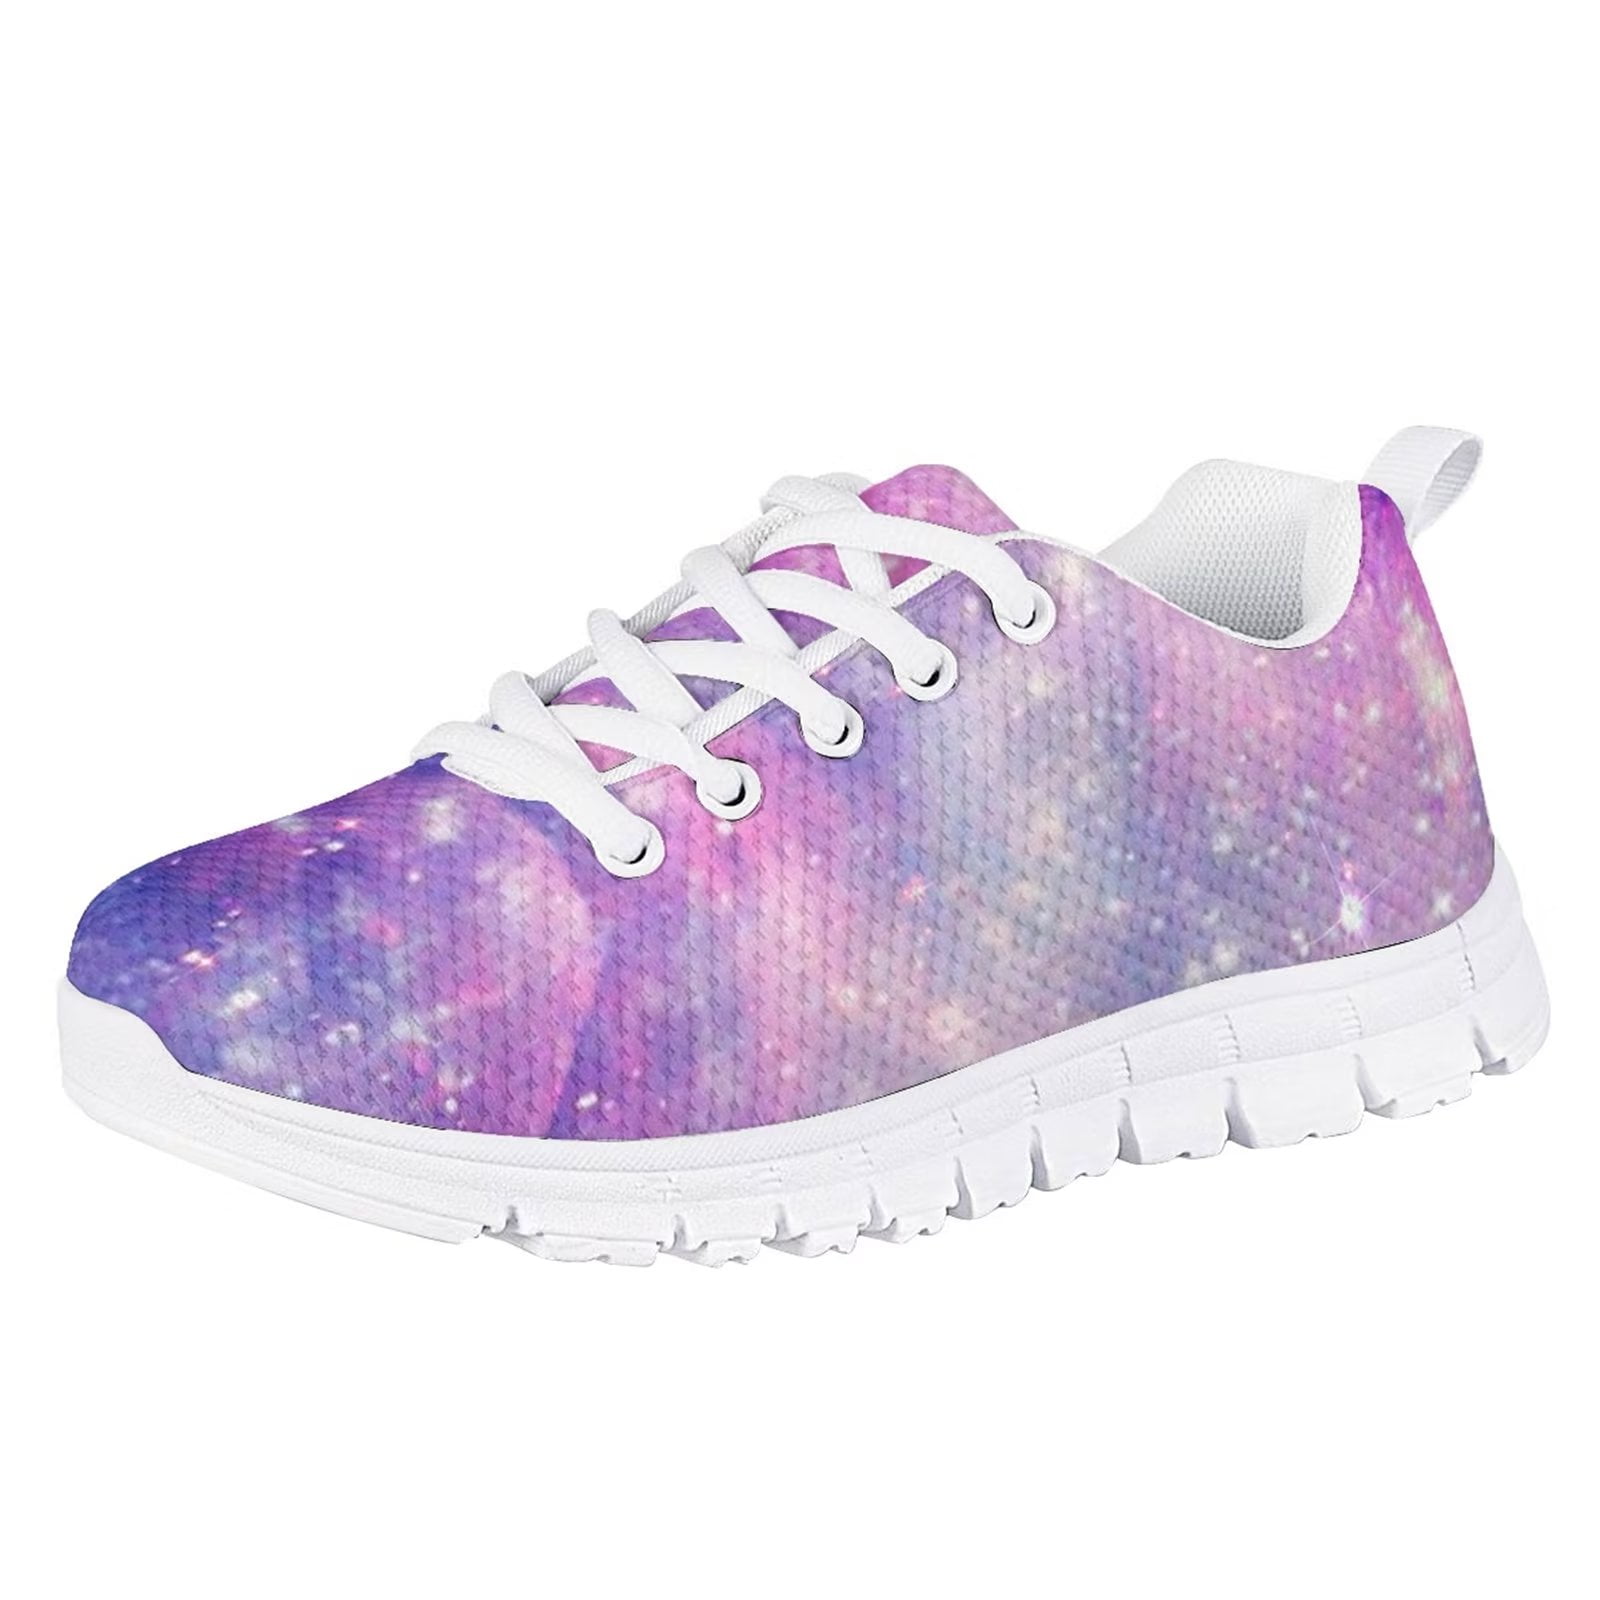 Pzuqiu Kids Shoes Galaxy Print Breathable Air Mesh Shoes for Child Comfortable Flat Shoes Ultralight Size - Walmart.com